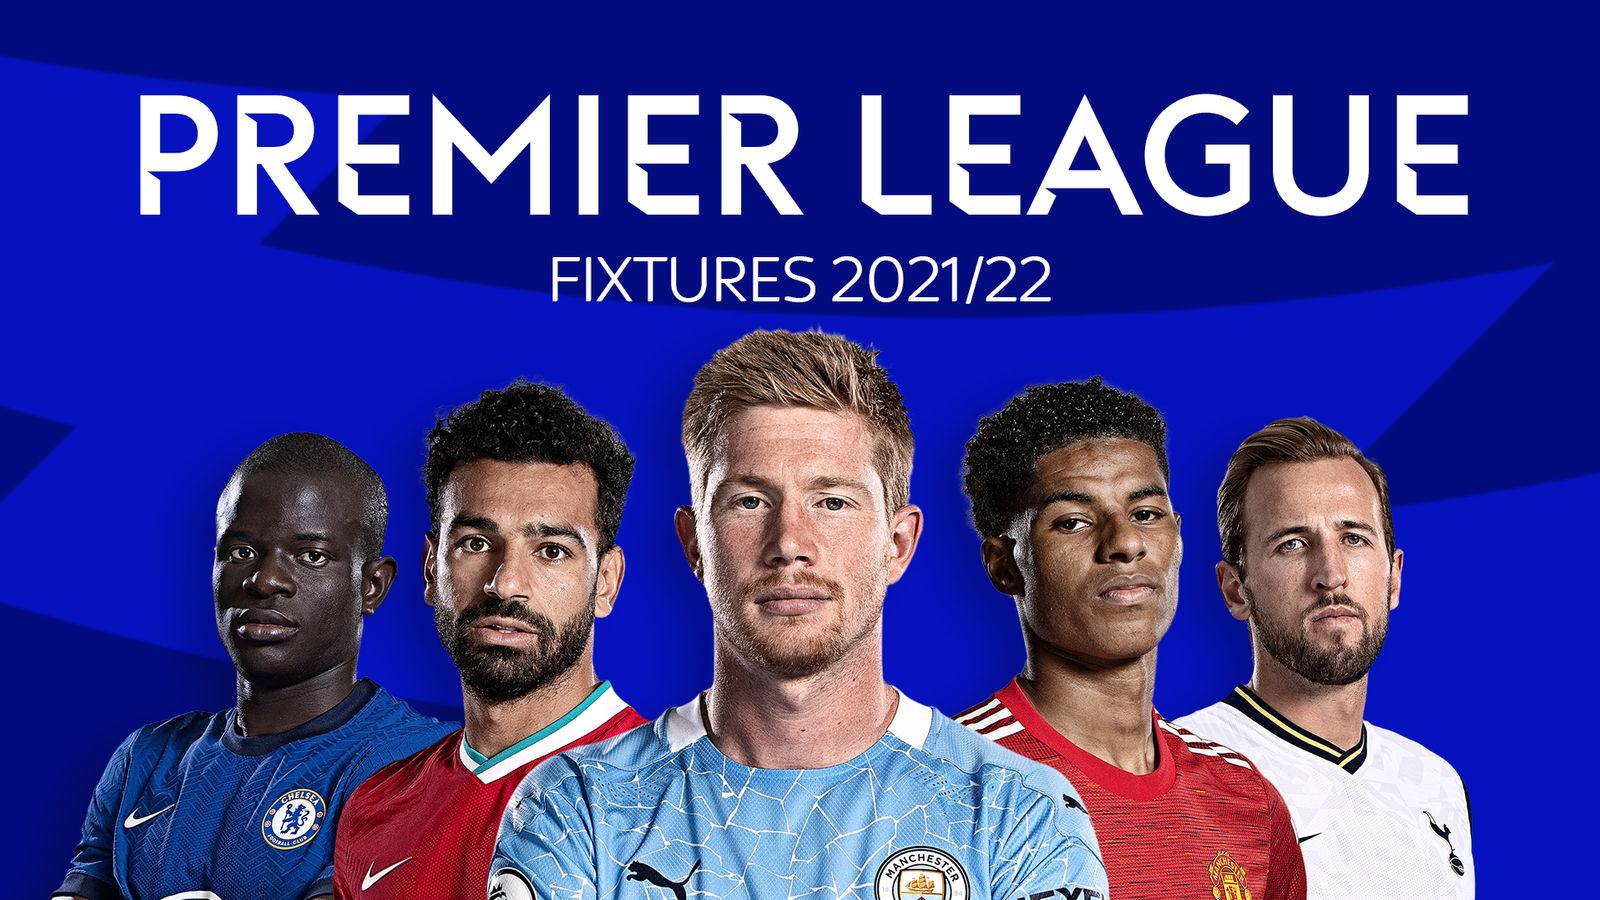 Premier League 2021/22 fixtures and schedule Man City title defence begins at Tottenham, Man Utd host Leeds, Liverpool visit Norwich on opening weekend Football News Sky Sports